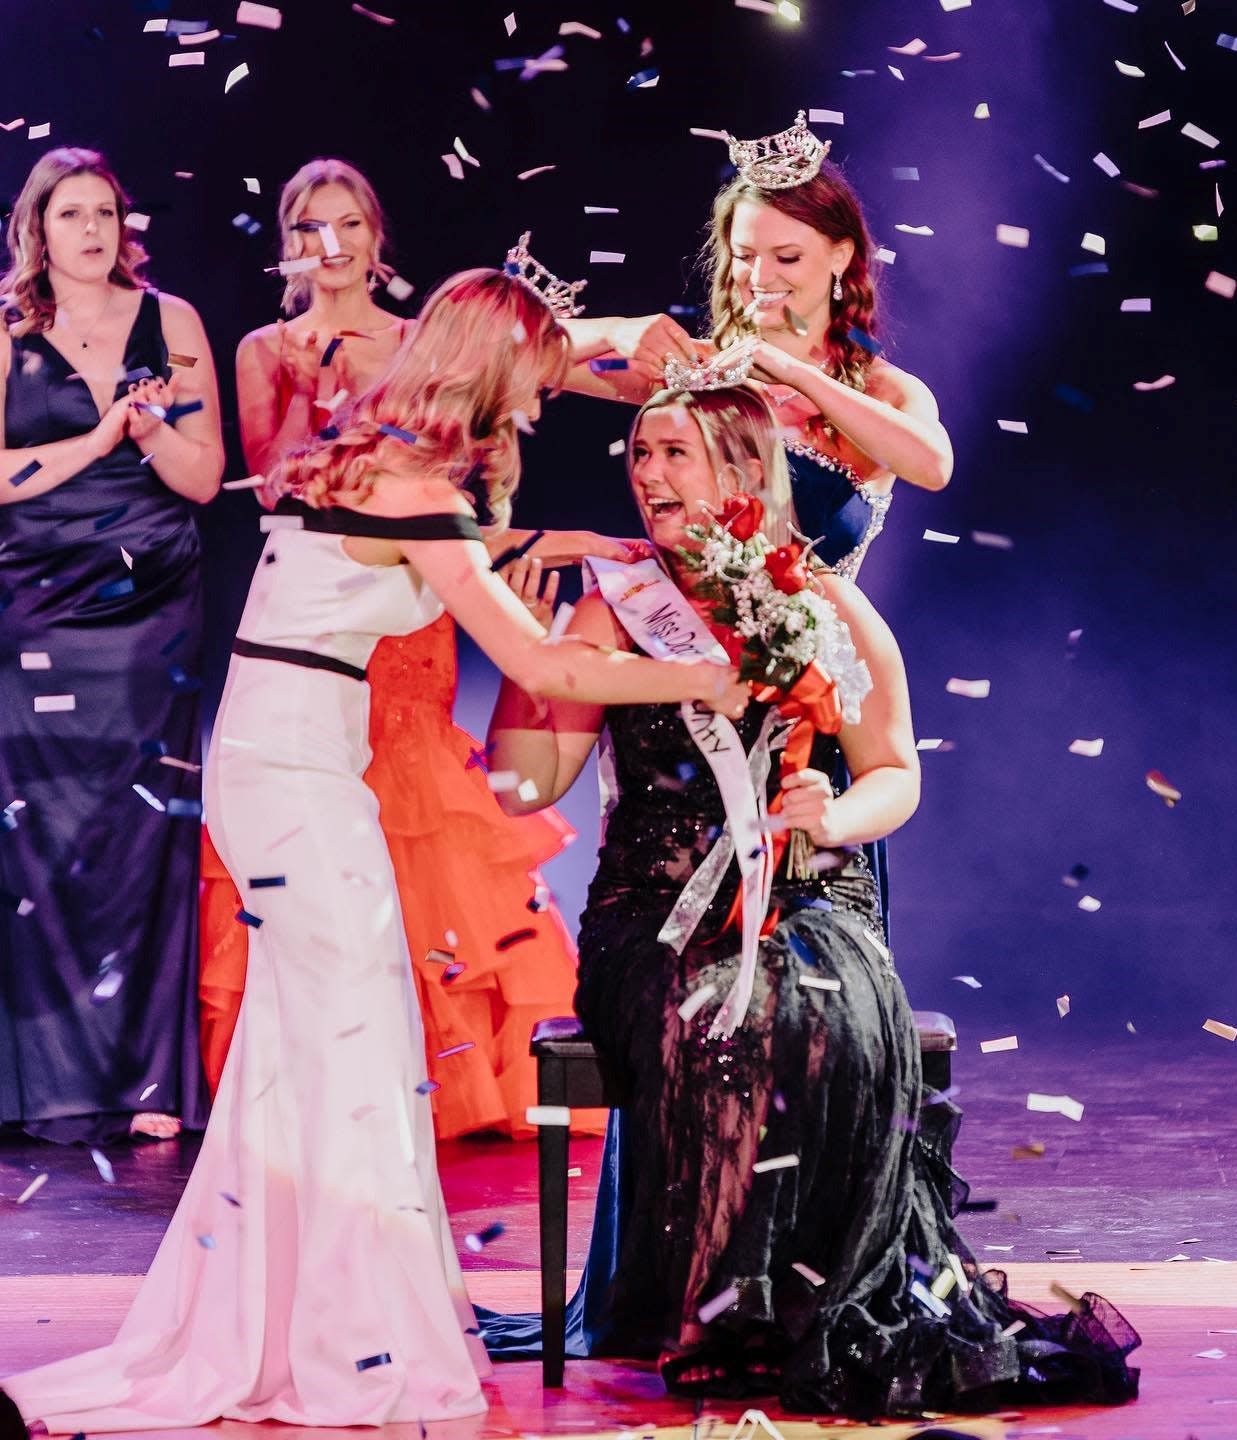 Lindsay Schuh receives her crown as Miss Door County 2023 from outgoing Miss Door County 2022 Chloe Staudenmaier, behind Schuh, and Miss Door County Outstanding Teen 2022 Claire Bohn during the pageant held Feb. 4 at Southern Door Community Auditorium.